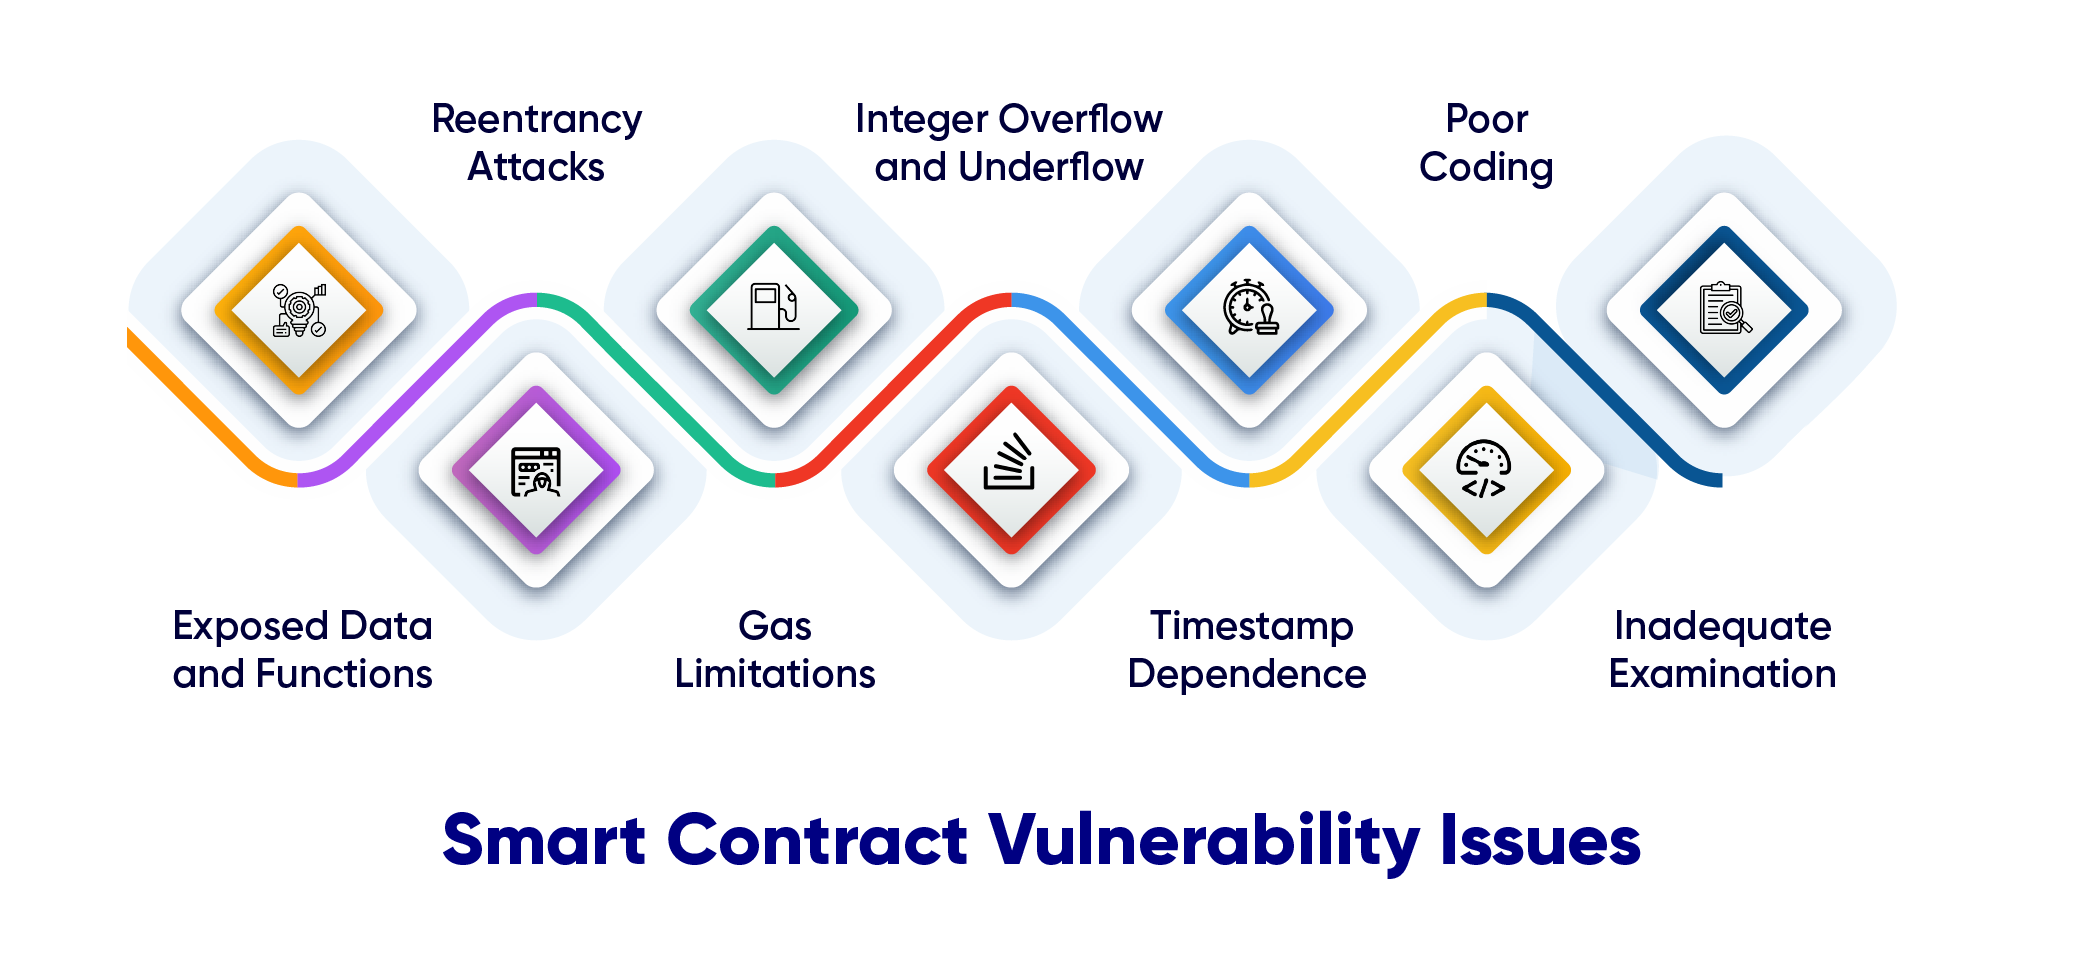 Smart Contract Audits Essential